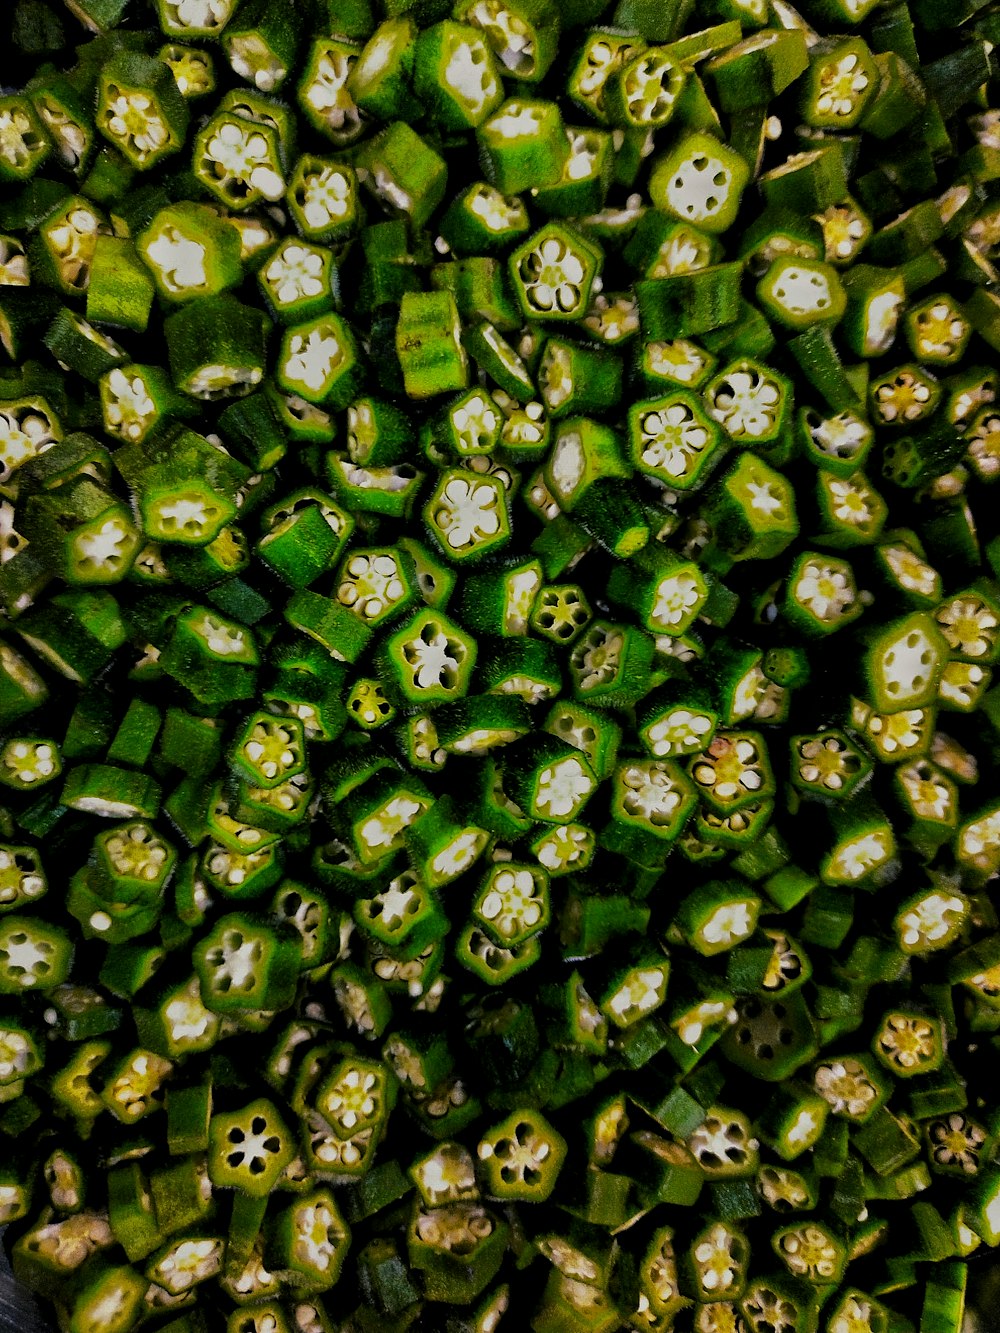 green and black round fruits